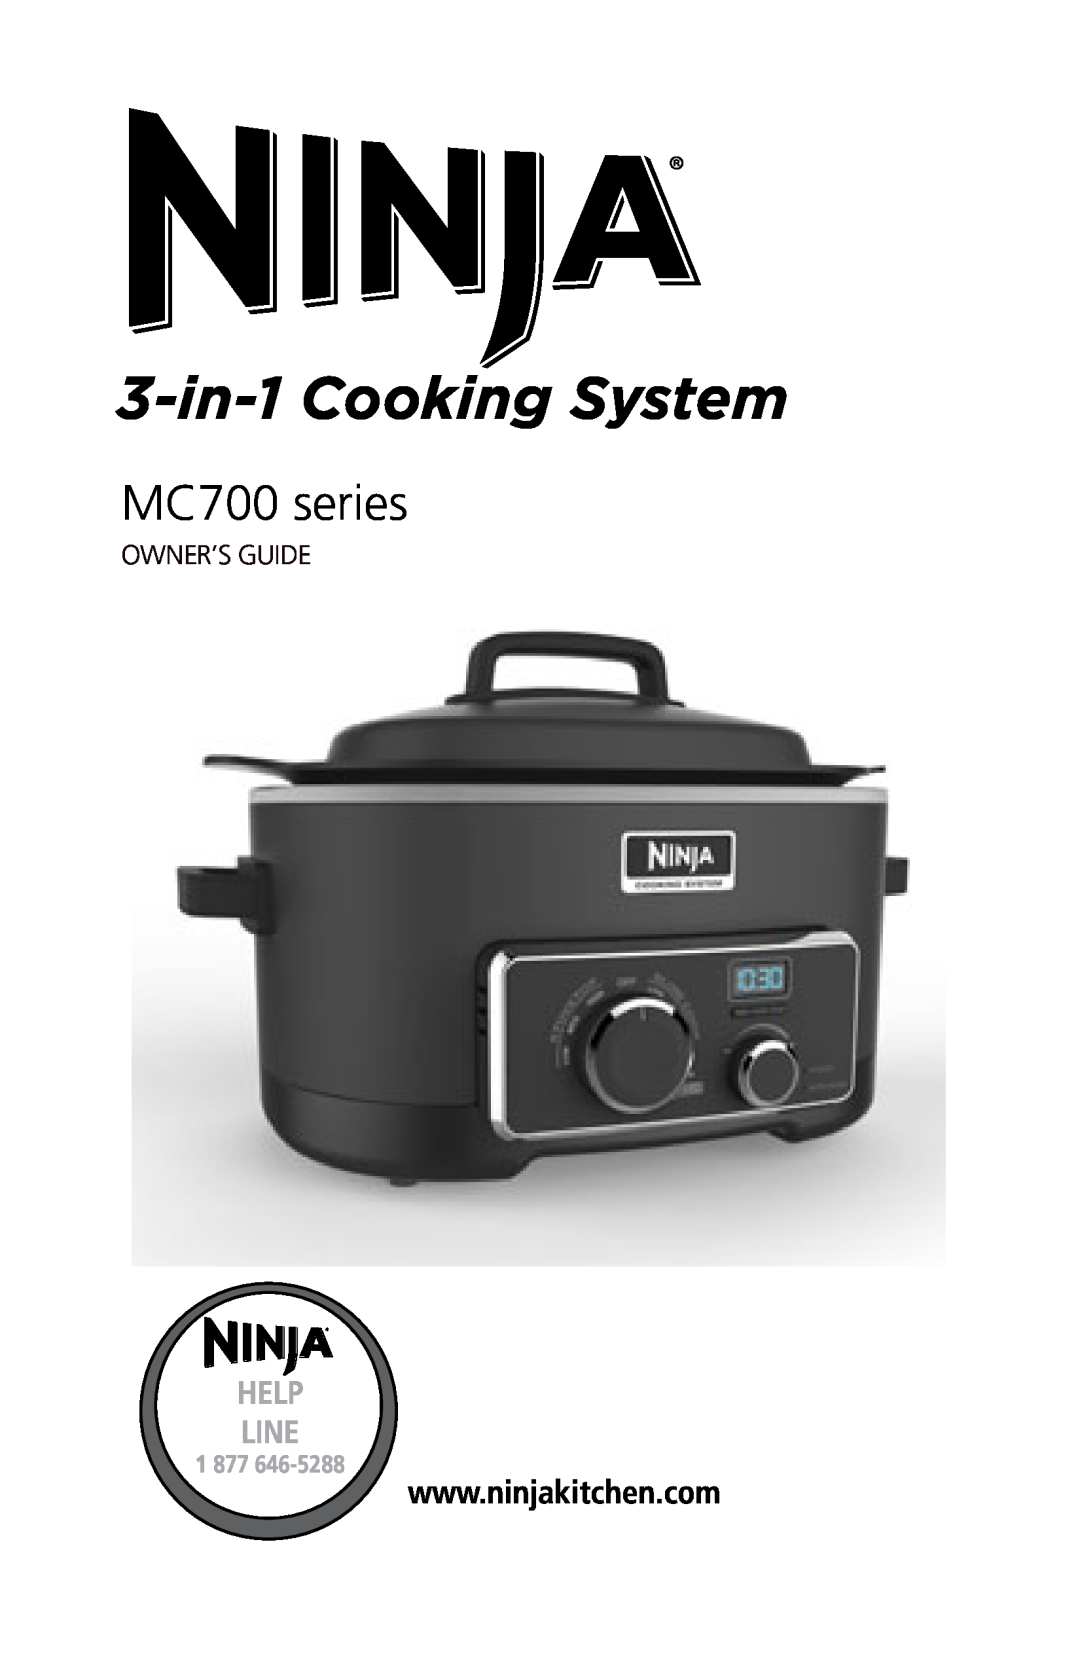 Euro-Pro MC702 15, MC703CO 15, MC703 15, MC700 15    15 manual 3-in-1Cooking System, MC700 series, Help Line, Owner’S Guide 